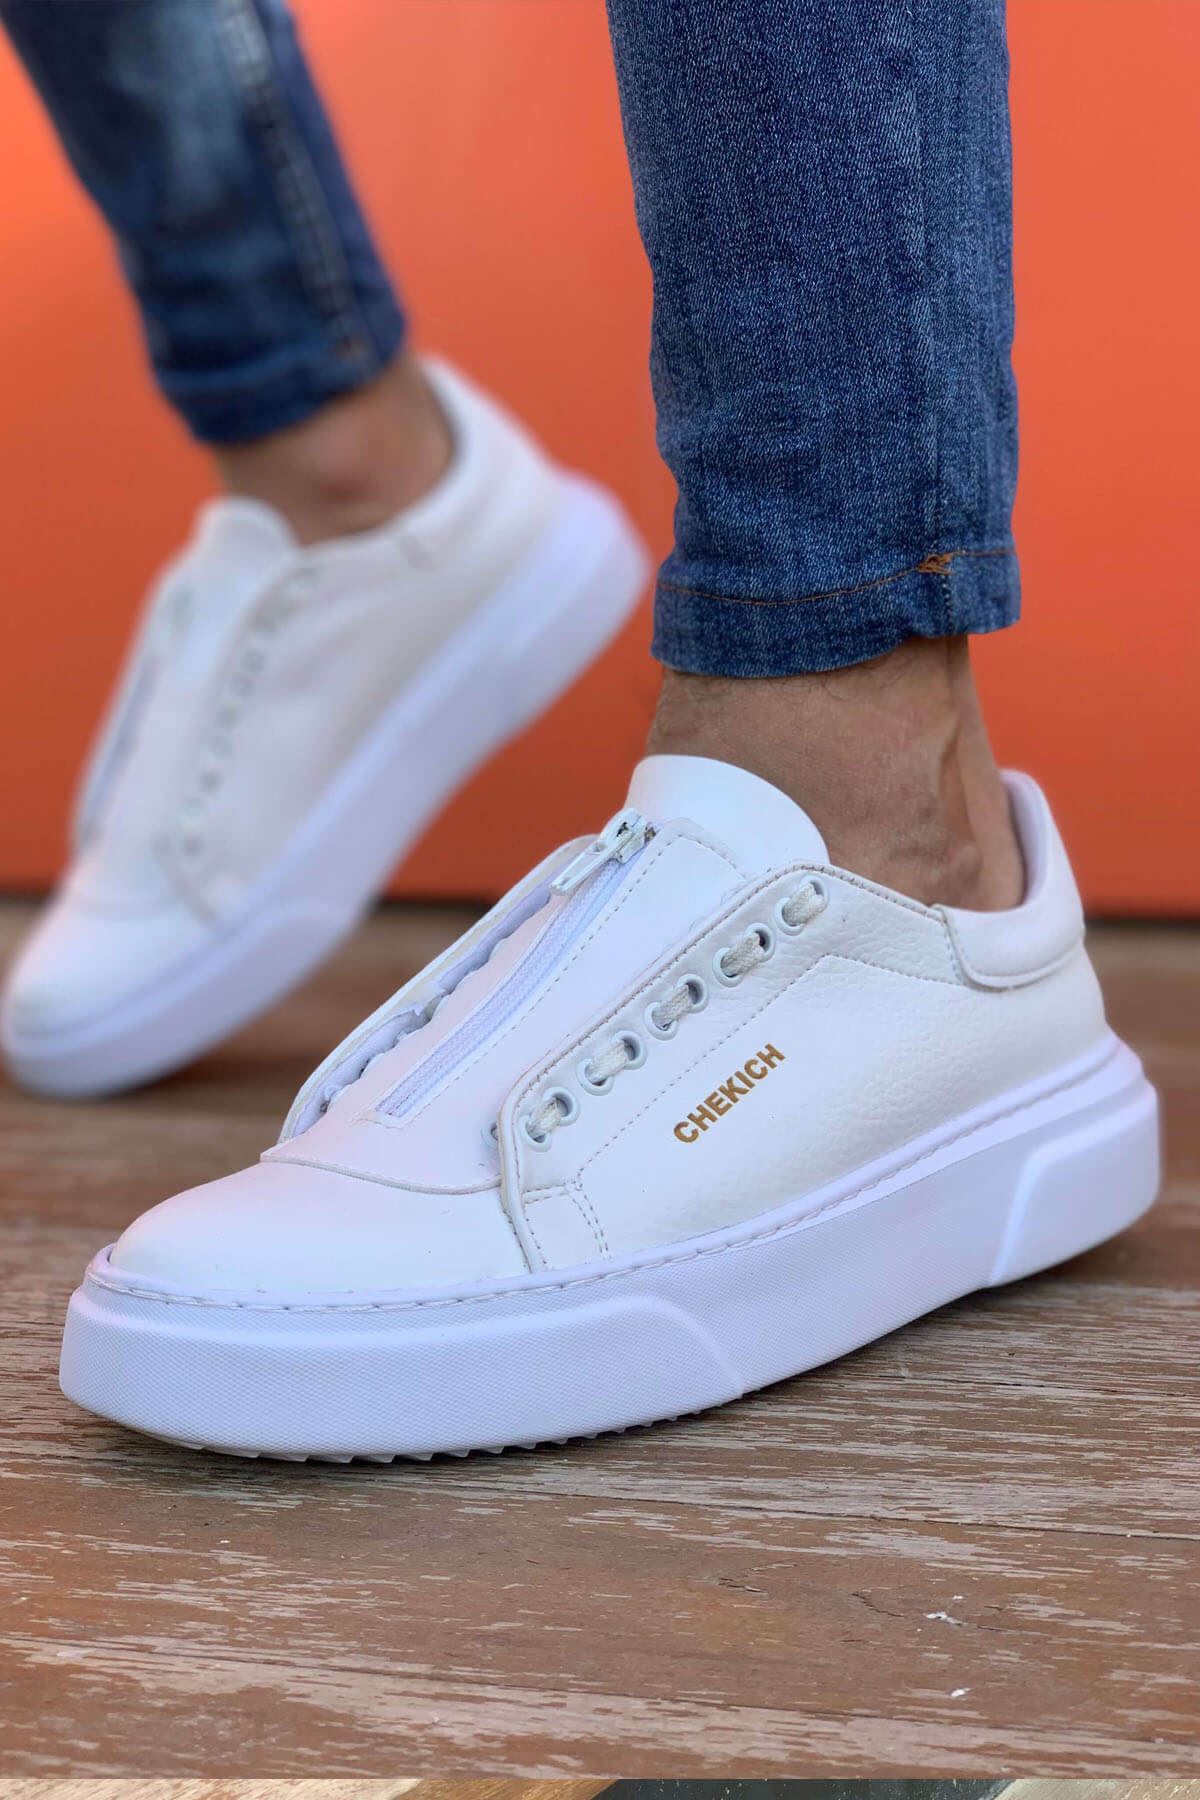 Chekich Men's Shoes White Sneakers Non Leather 2021 Summer Season Zipped Closure Type Casual Sport Breathable Lightweight Solid Sneakers Odorless New Fashion Comfortable Footwear Sewing Sole Lace Up Slip On CH092 V2